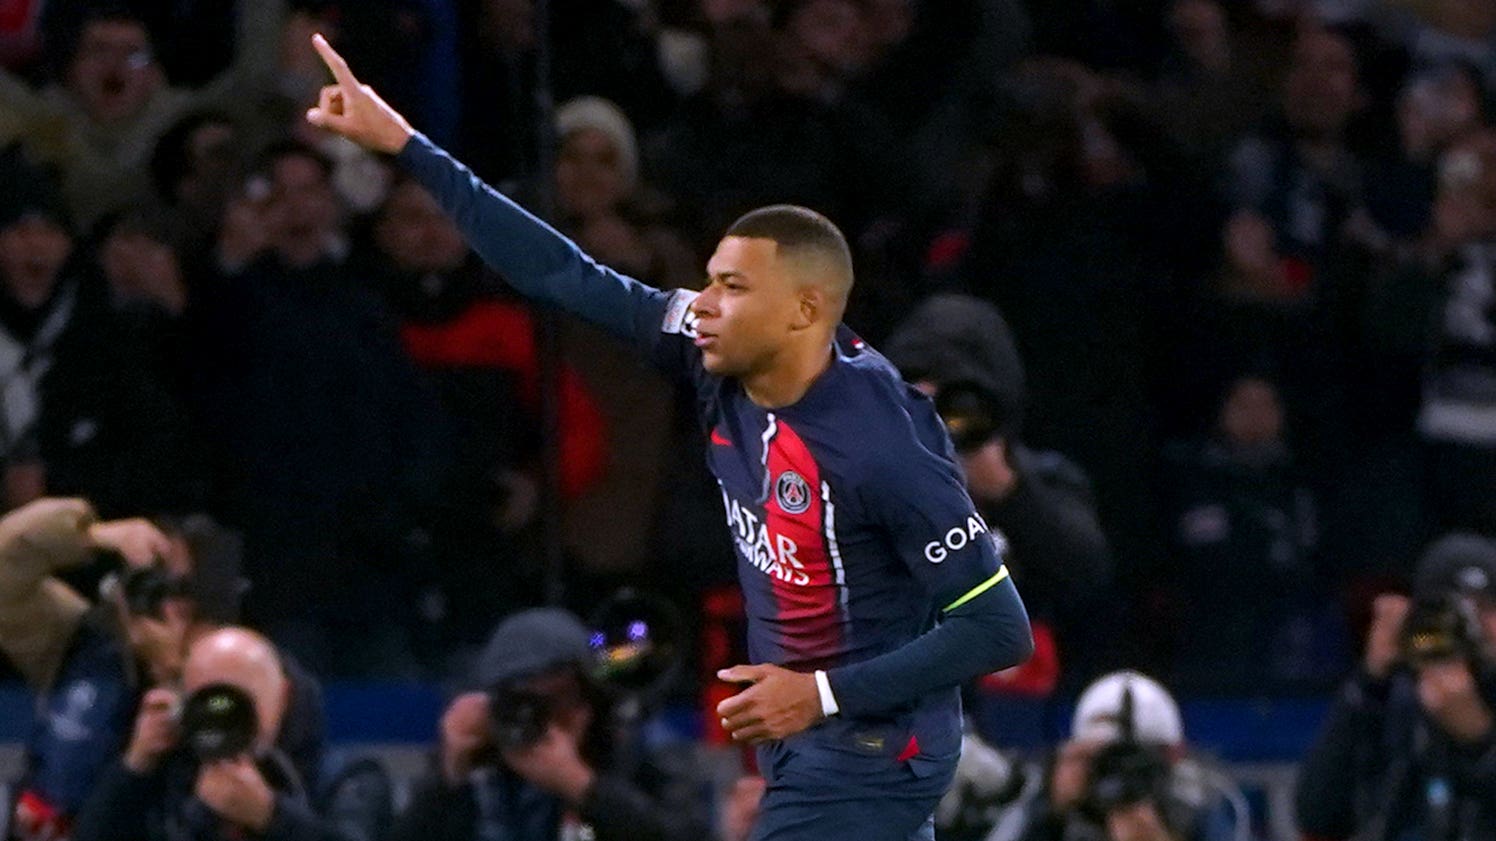 Newcastle denied Champions League win after controversial Kylian Mbappe penalty